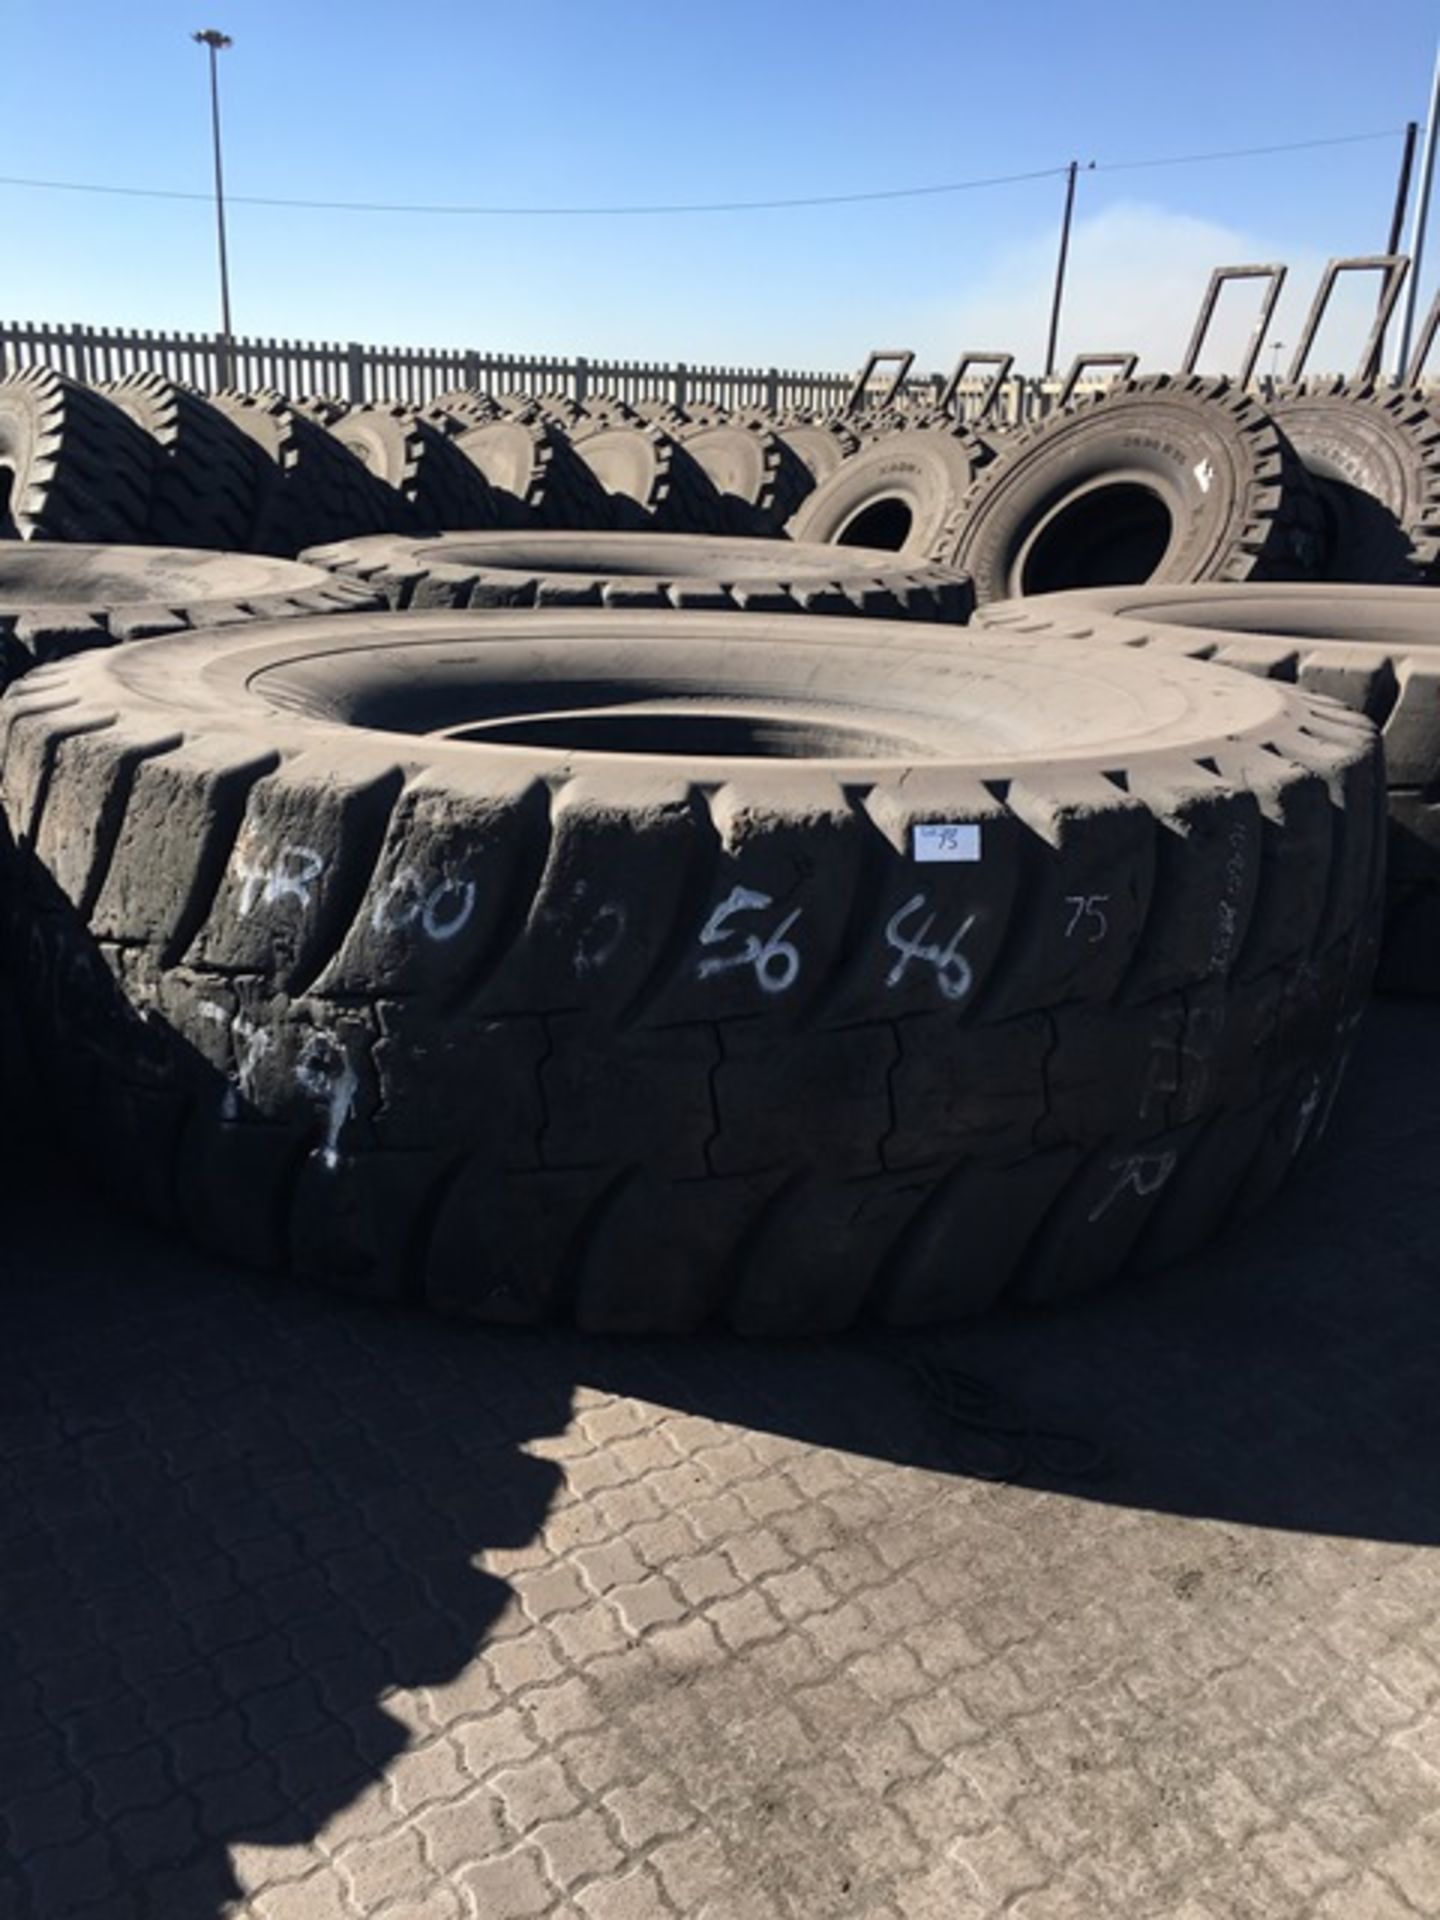 14 X MICHELIN 40.00 R57 TYRES - TO BE SOLD AS ONE LOT (USED) (LOCATED IN MIDDELBURG, MPUMALANGA)